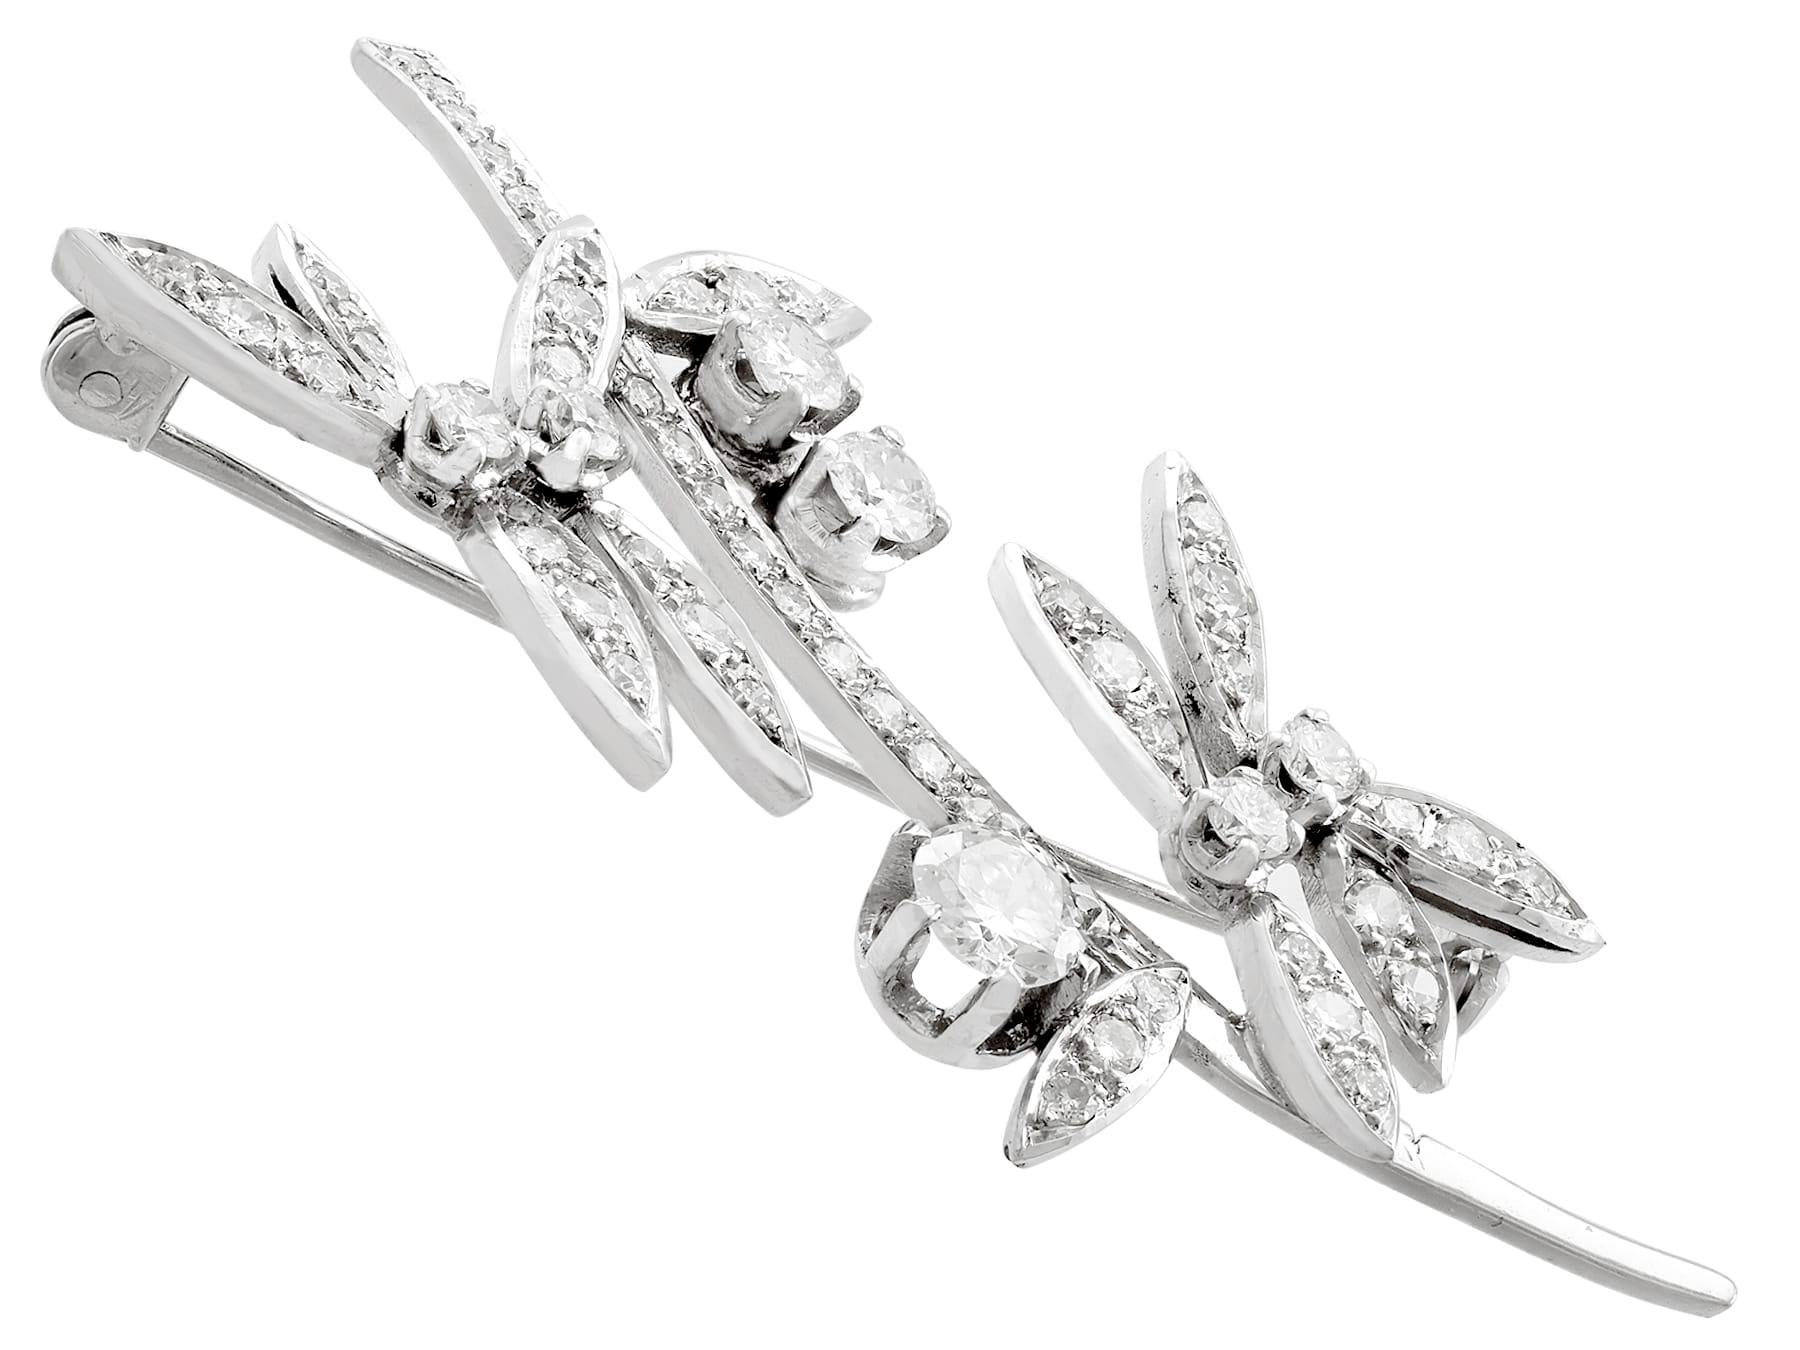 1950s 2.71 Carat Diamond and White Gold Floral Brooch In Excellent Condition For Sale In Jesmond, Newcastle Upon Tyne